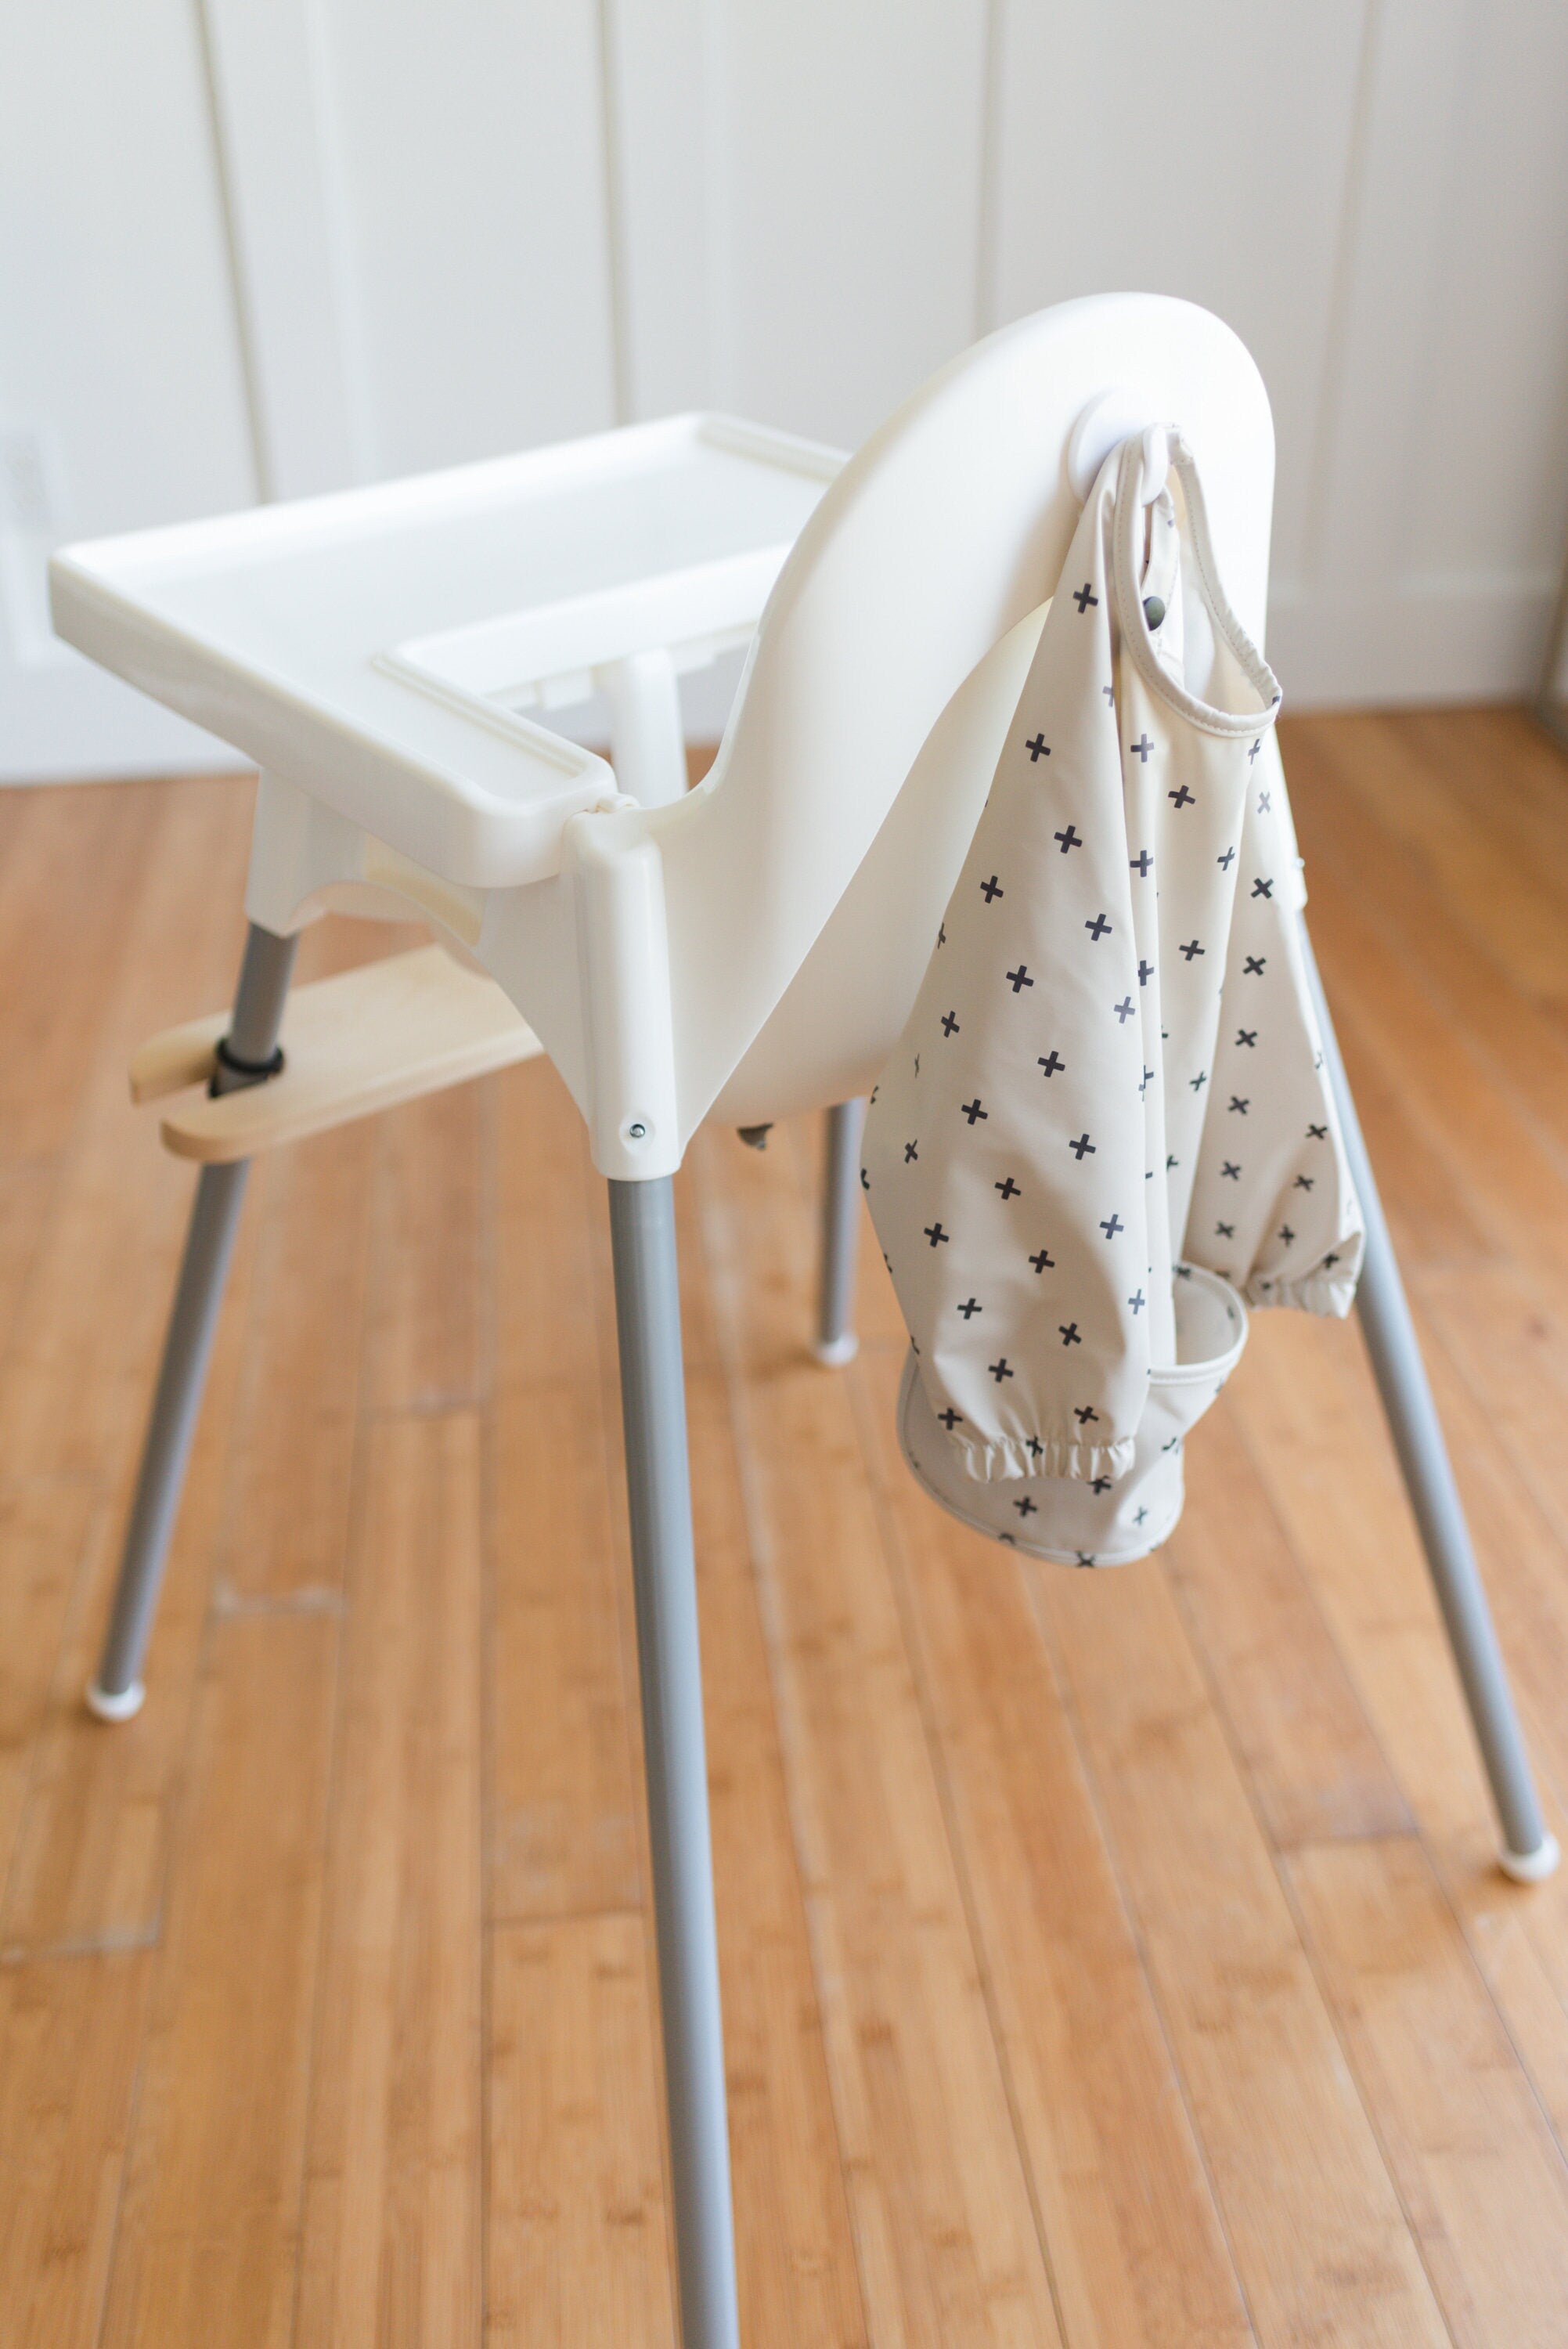 Adjustable Bamboo Footrest for Ikea Antilop High Chair 